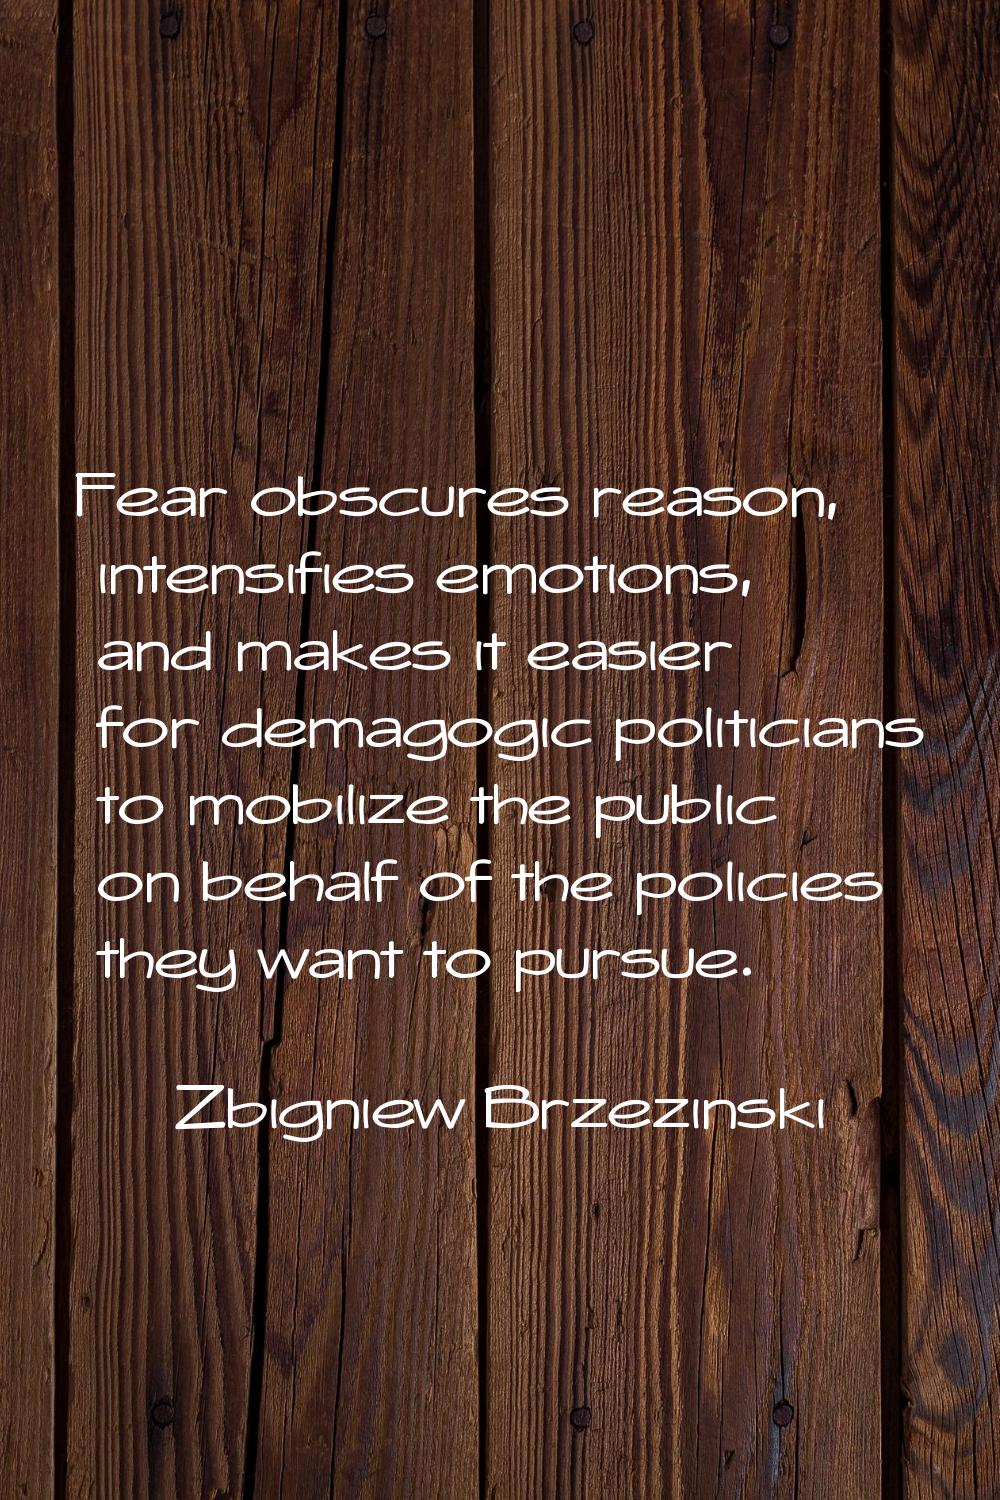 Fear obscures reason, intensifies emotions, and makes it easier for demagogic politicians to mobili